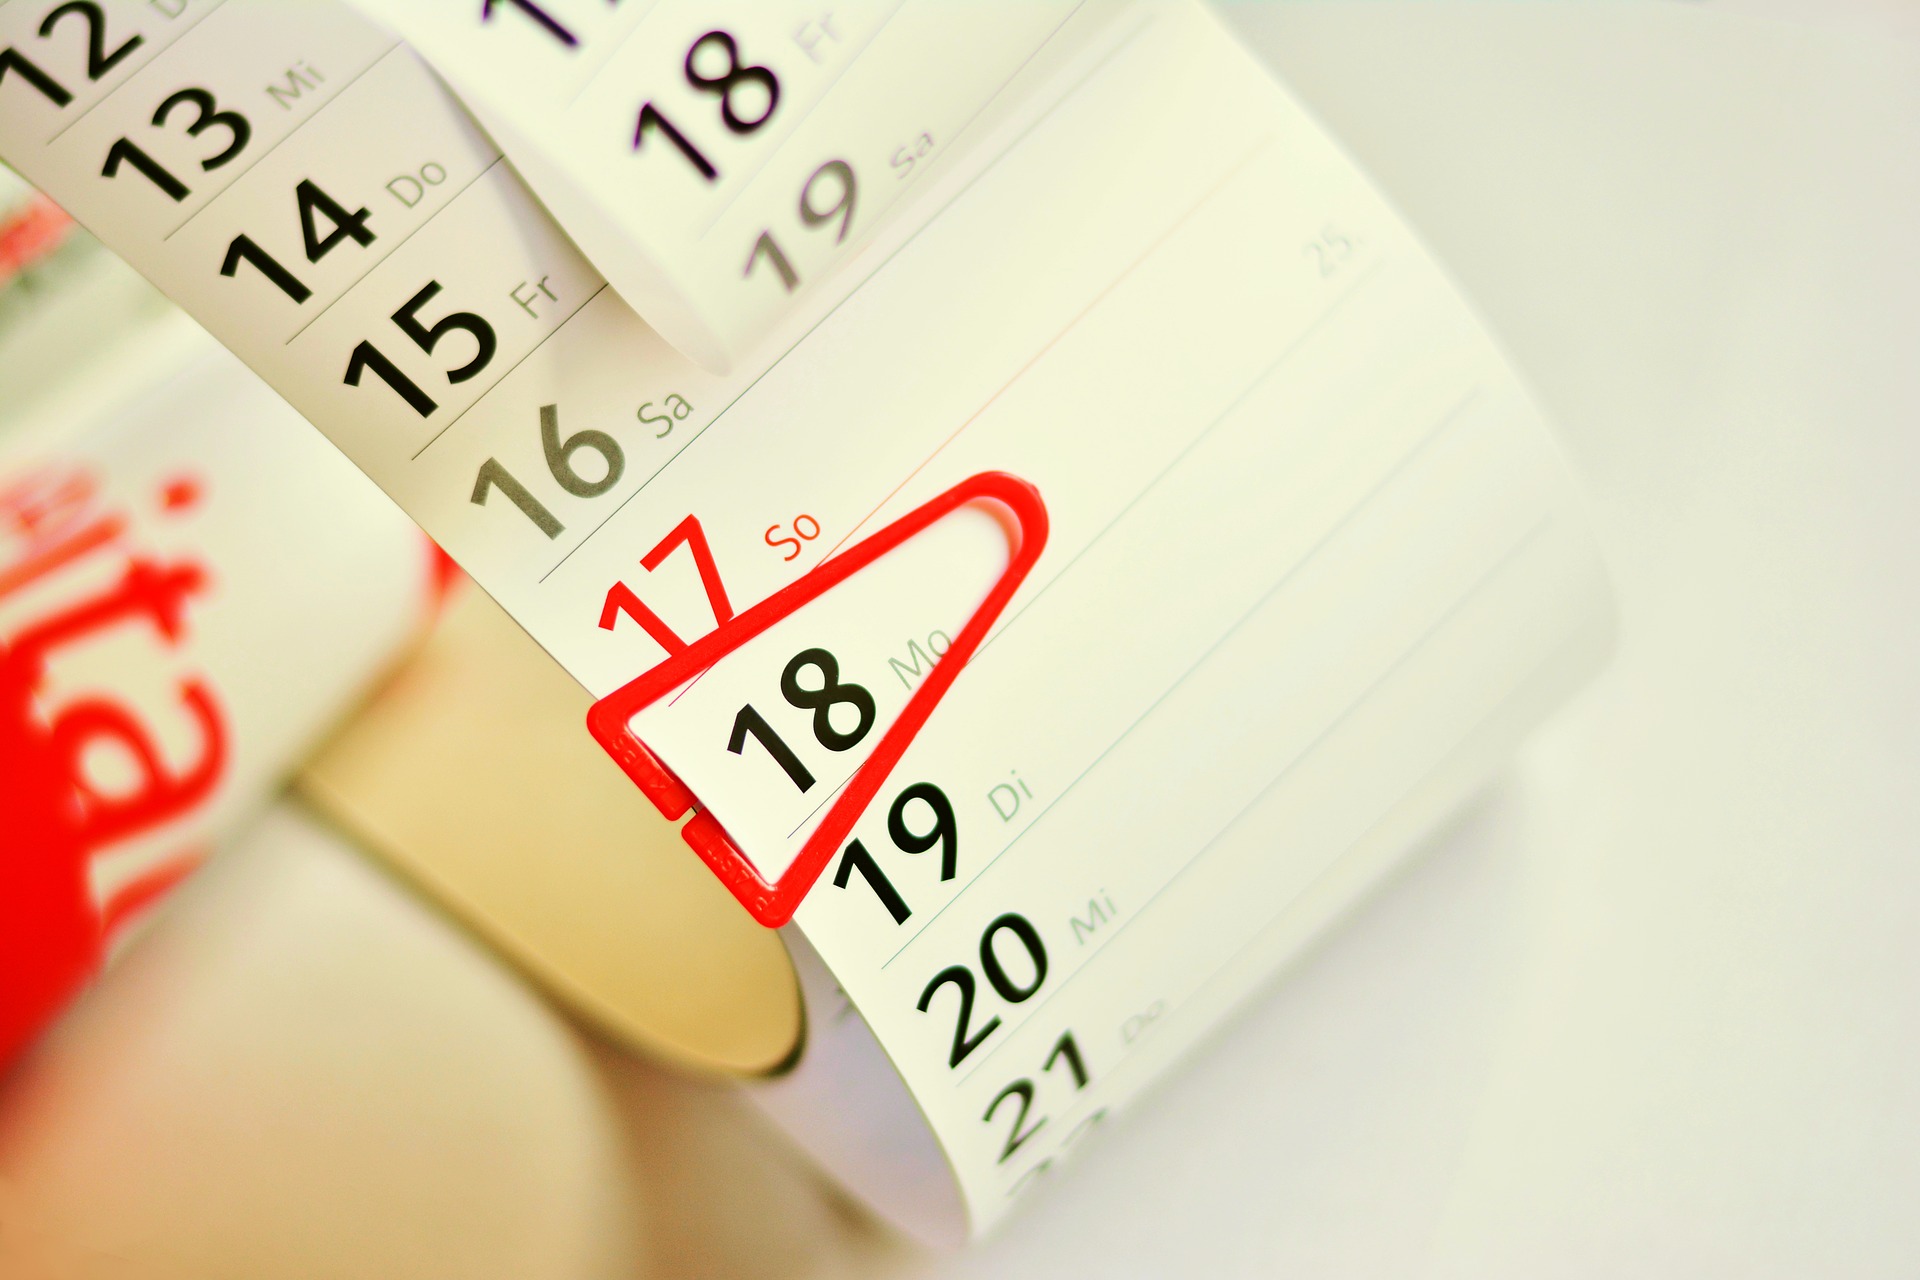 Lease Administration post: Get your dates right!